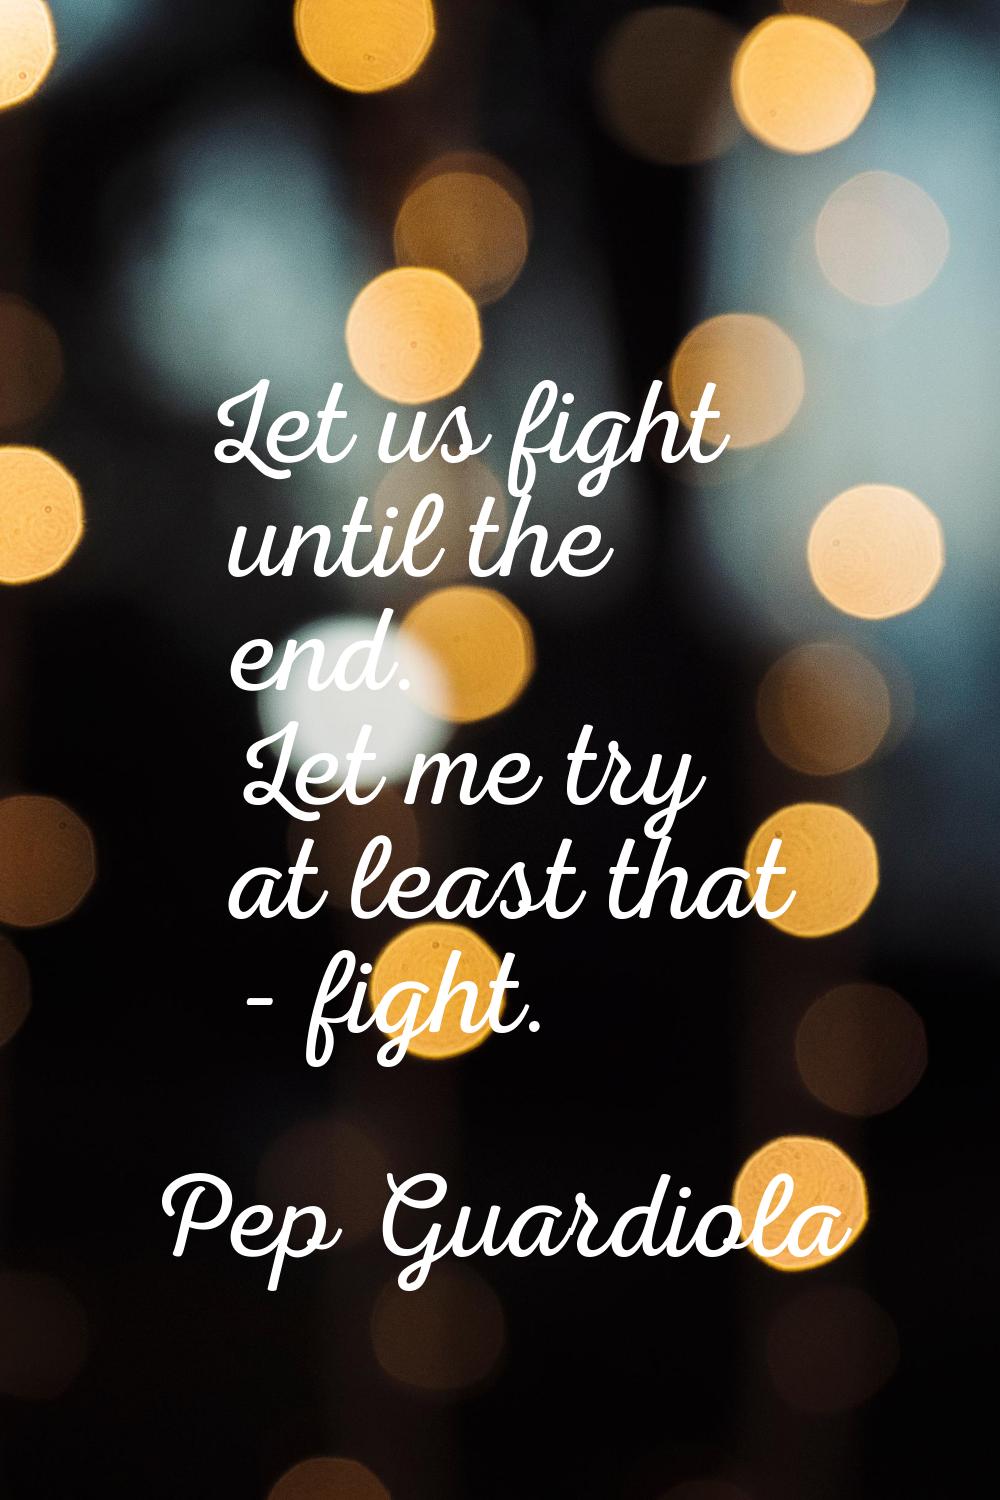 Let us fight until the end. Let me try at least that - fight.